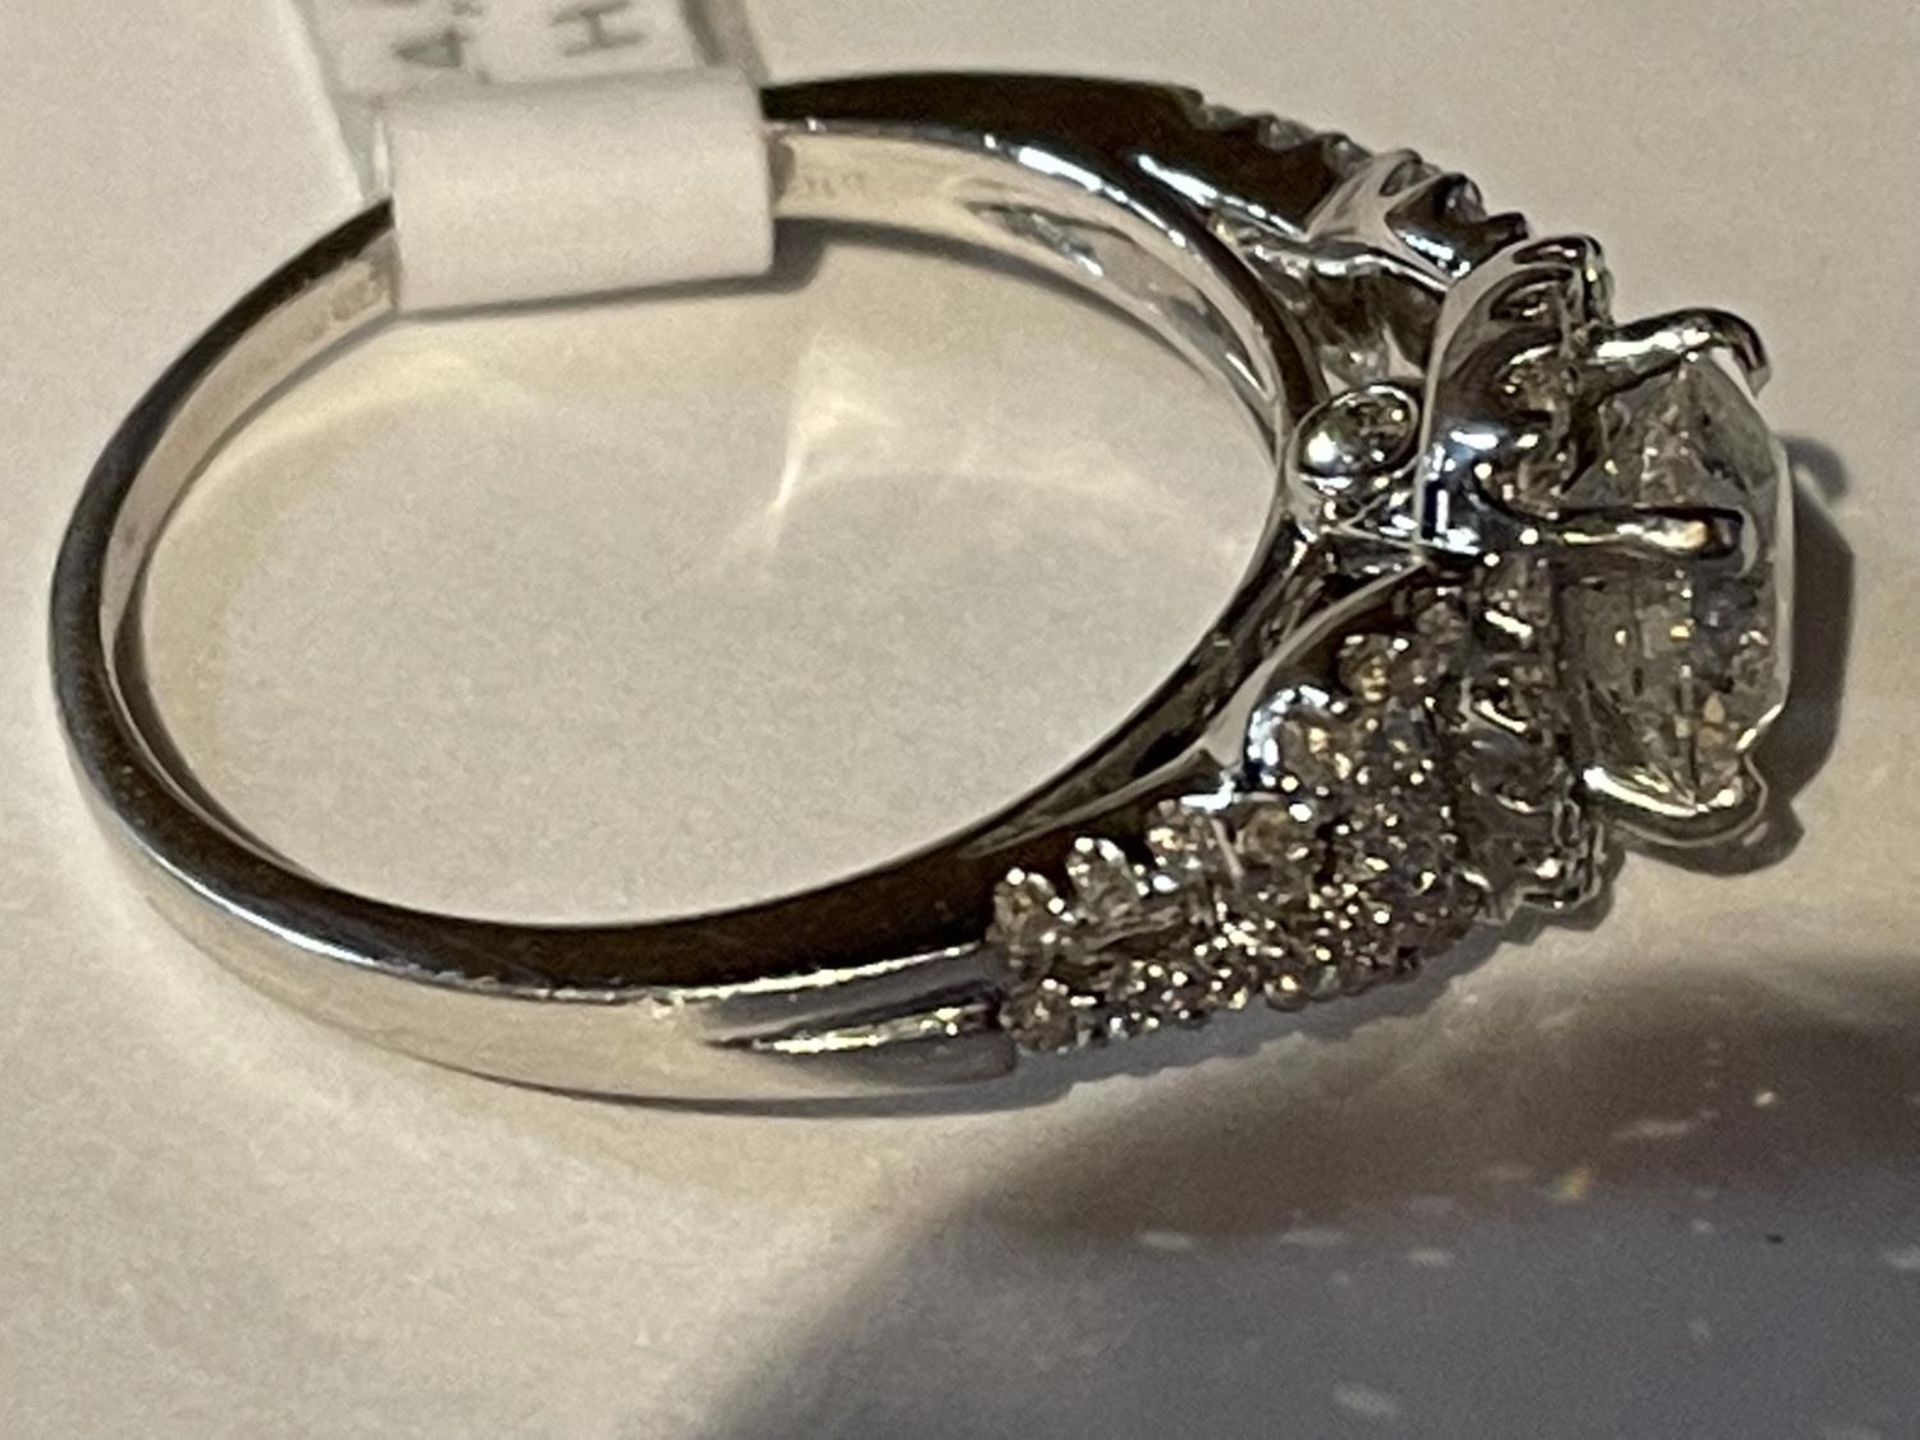 AN 18 CARAT WHITE GOLD RING WITH A CENTRAL 1.03CT SURROUNDED BY SMALL DIAMONDS MADE UP TO 0.30CT - Image 3 of 4